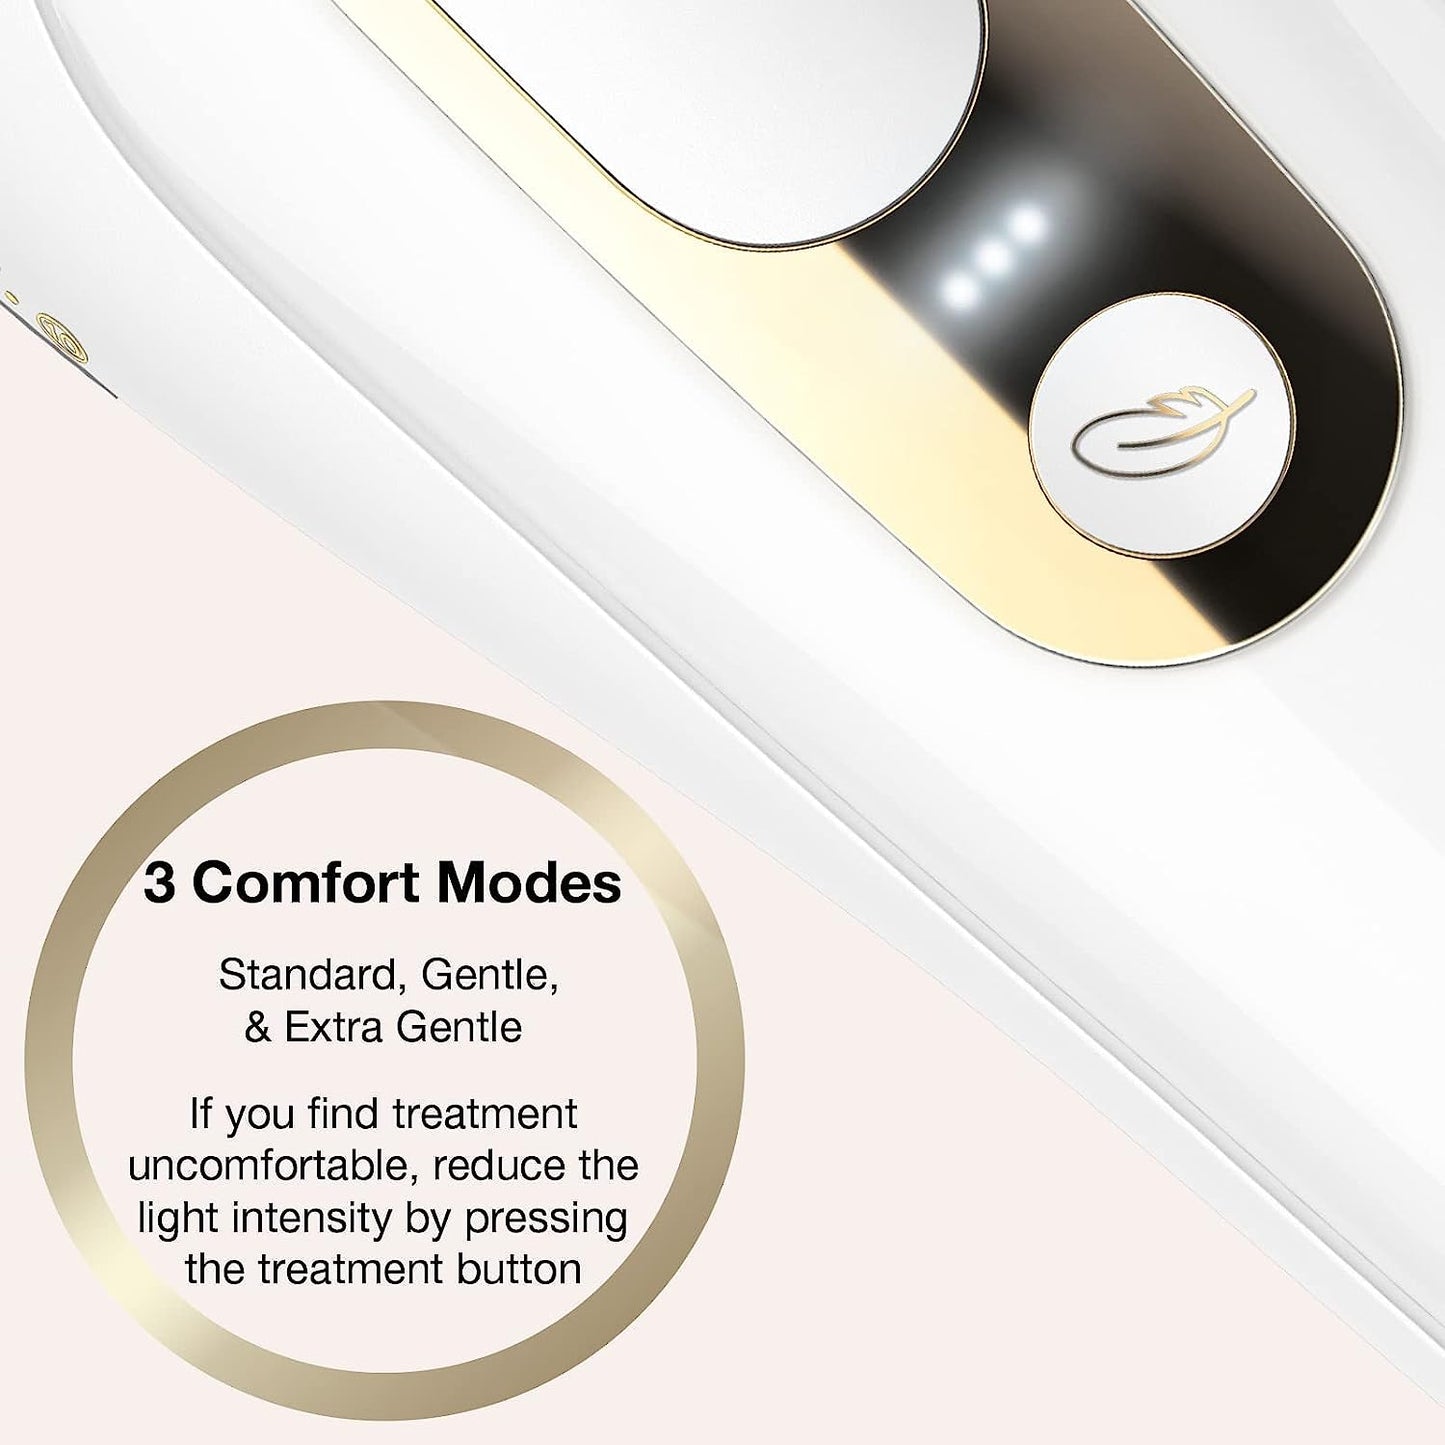 Braun IPL Long-Lasting Hair Removal for Women and Men, Silk Expert Pro 5 with Venus Swirl Razor, Long-lasting Reduction in Hair Regrowth for Body & Face, Corded